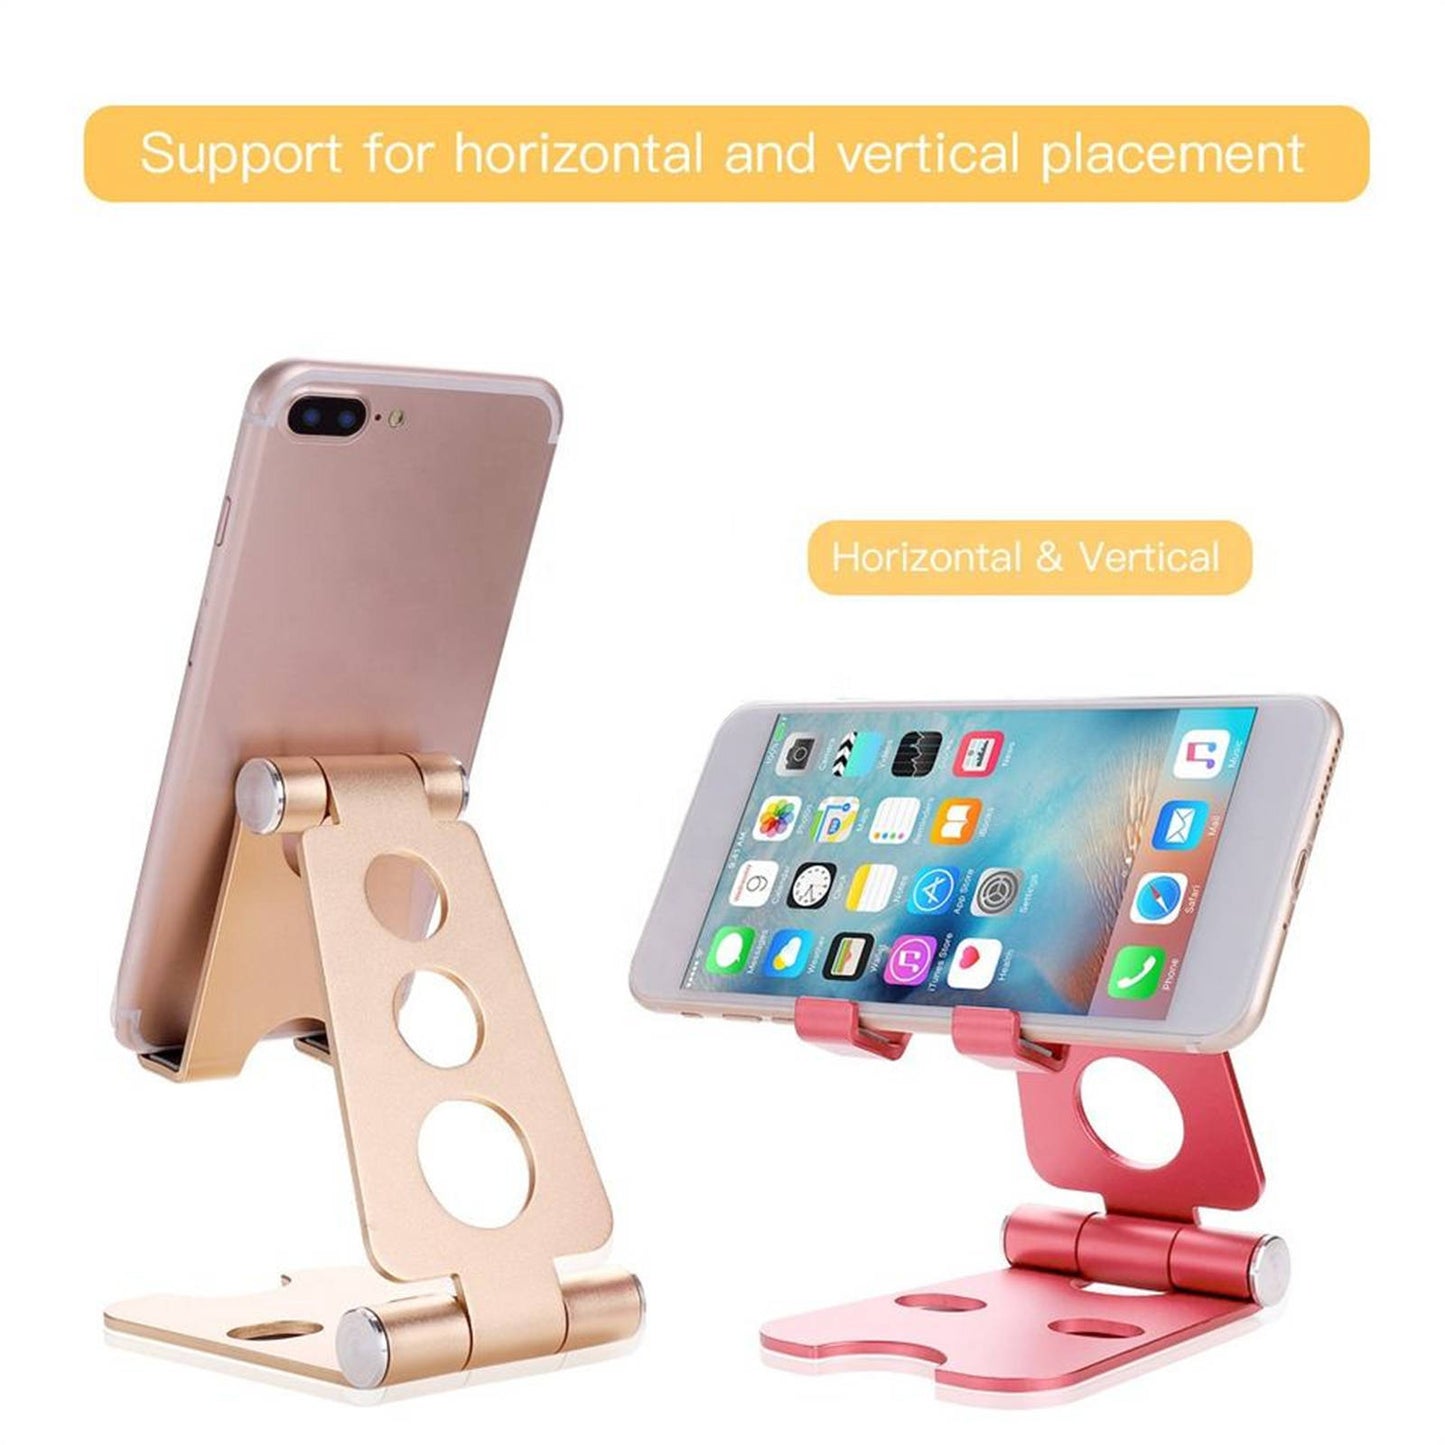 Mobax Portable Phone Holder Stand Metal Phone Holder Foldable Mobile Phone Stand